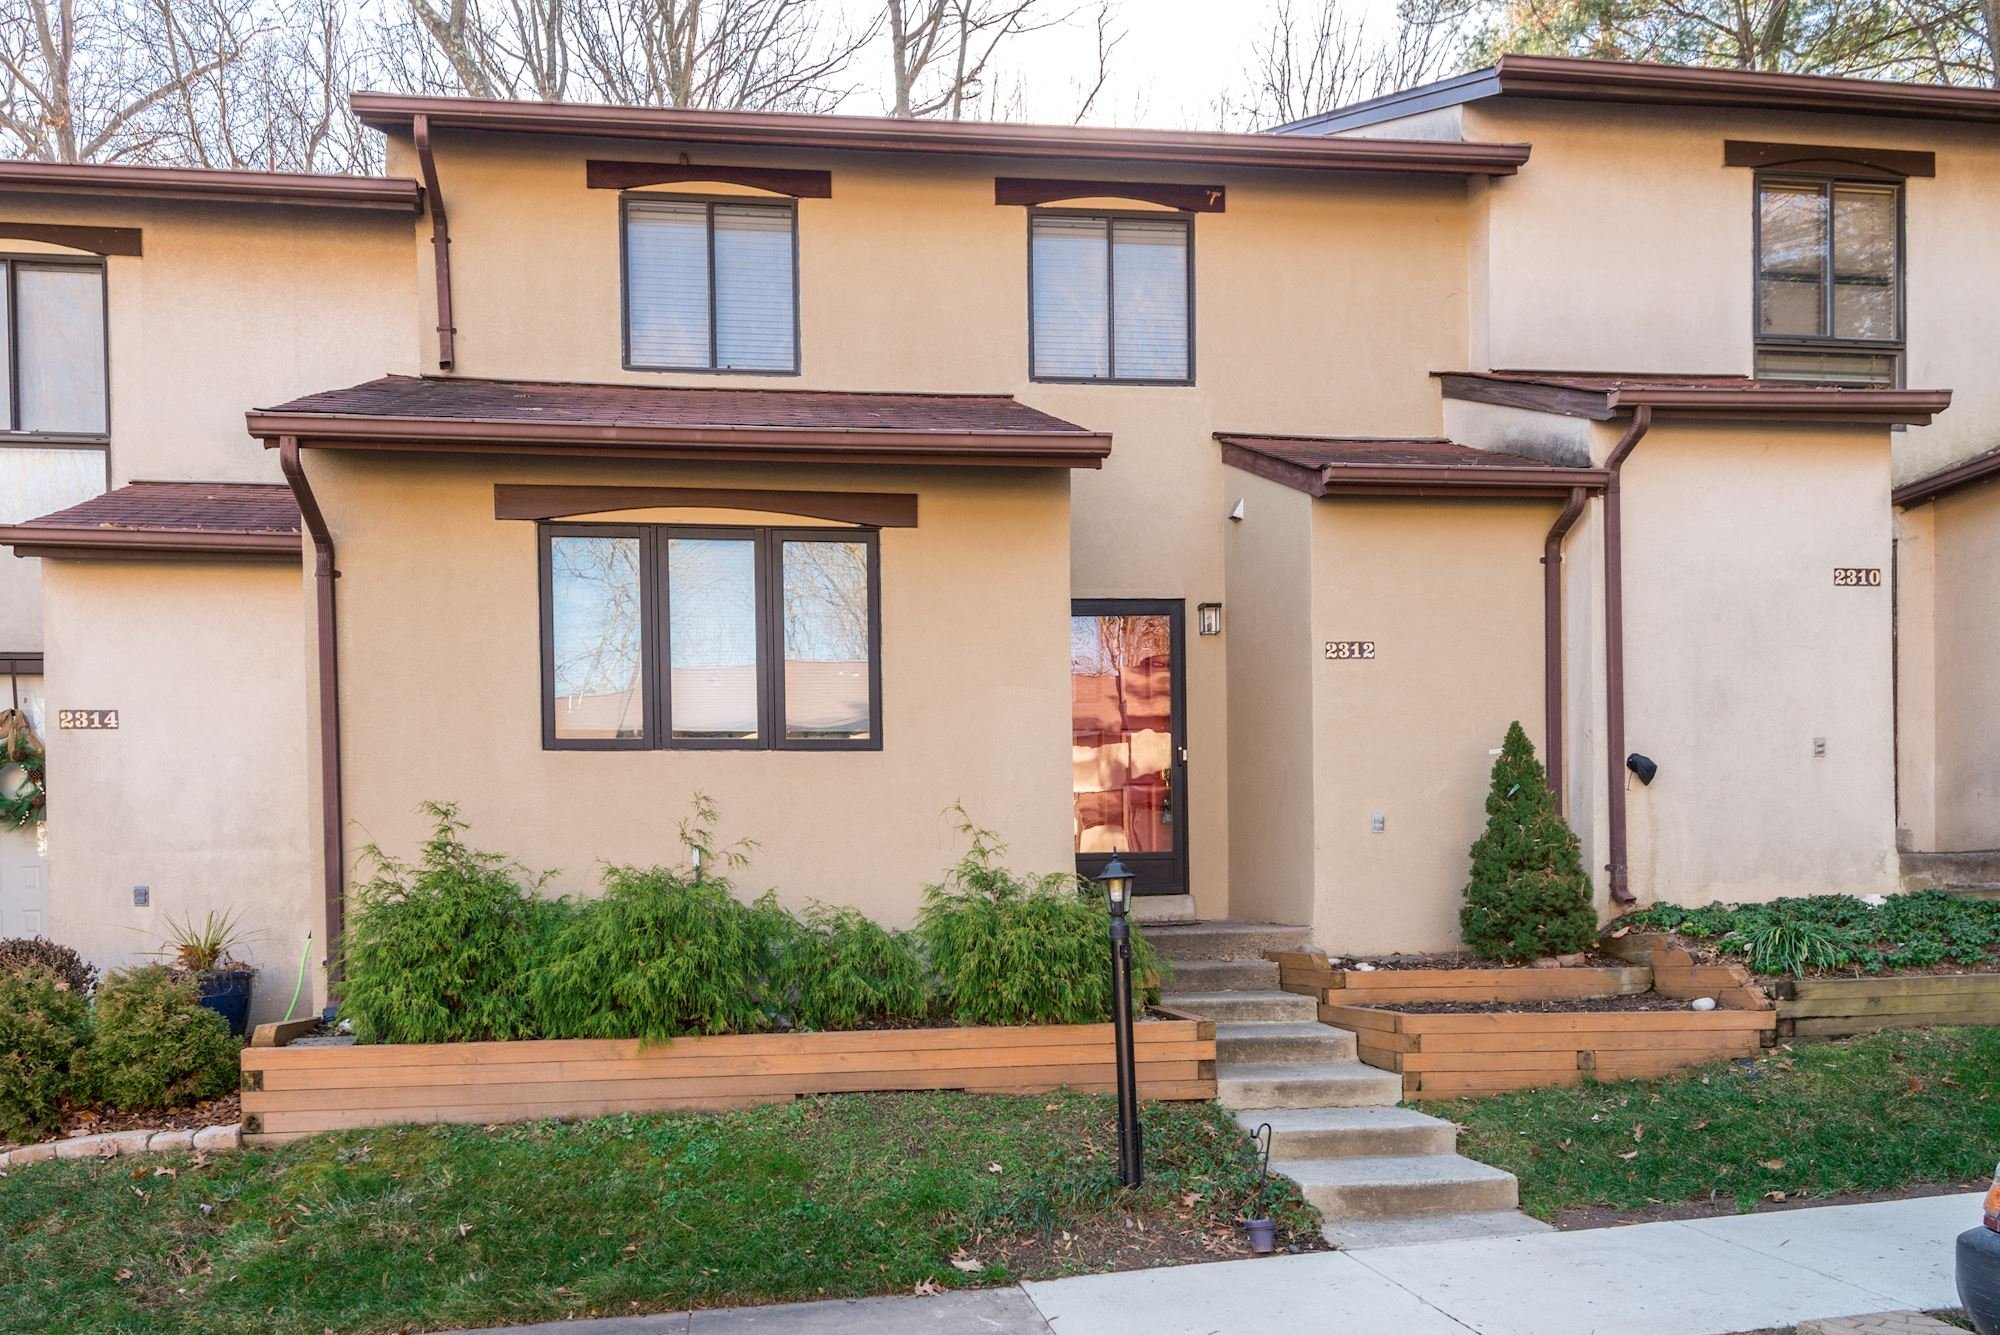 NEW LISTING: Reston, VA Rental With Spacious and Open Design